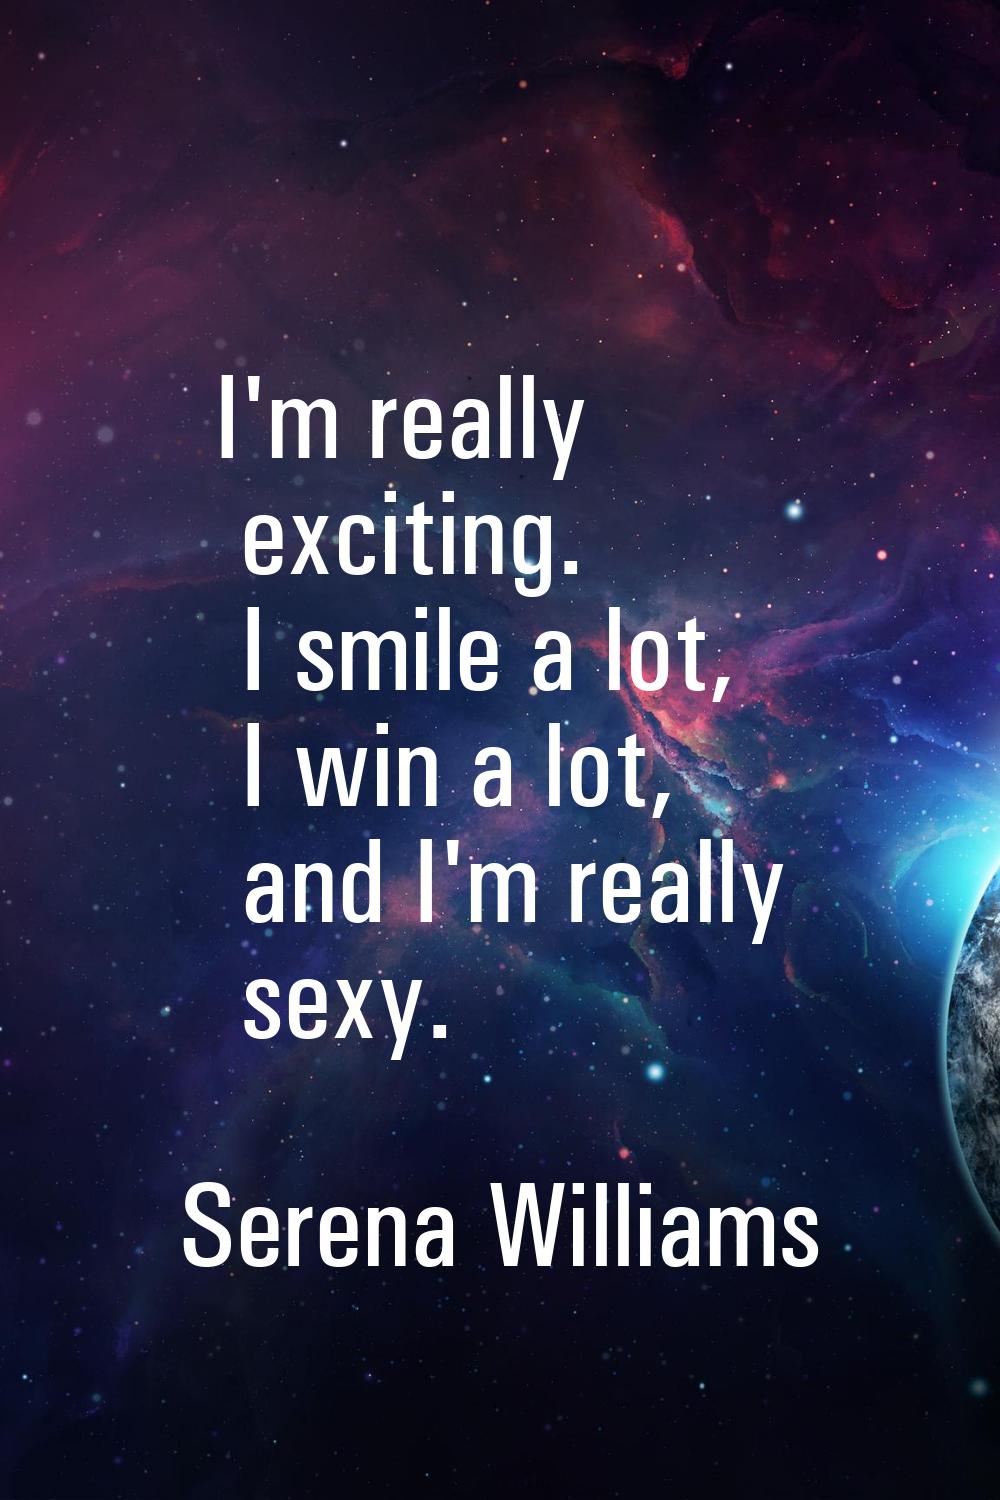 I'm really exciting. I smile a lot, I win a lot, and I'm really sexy.